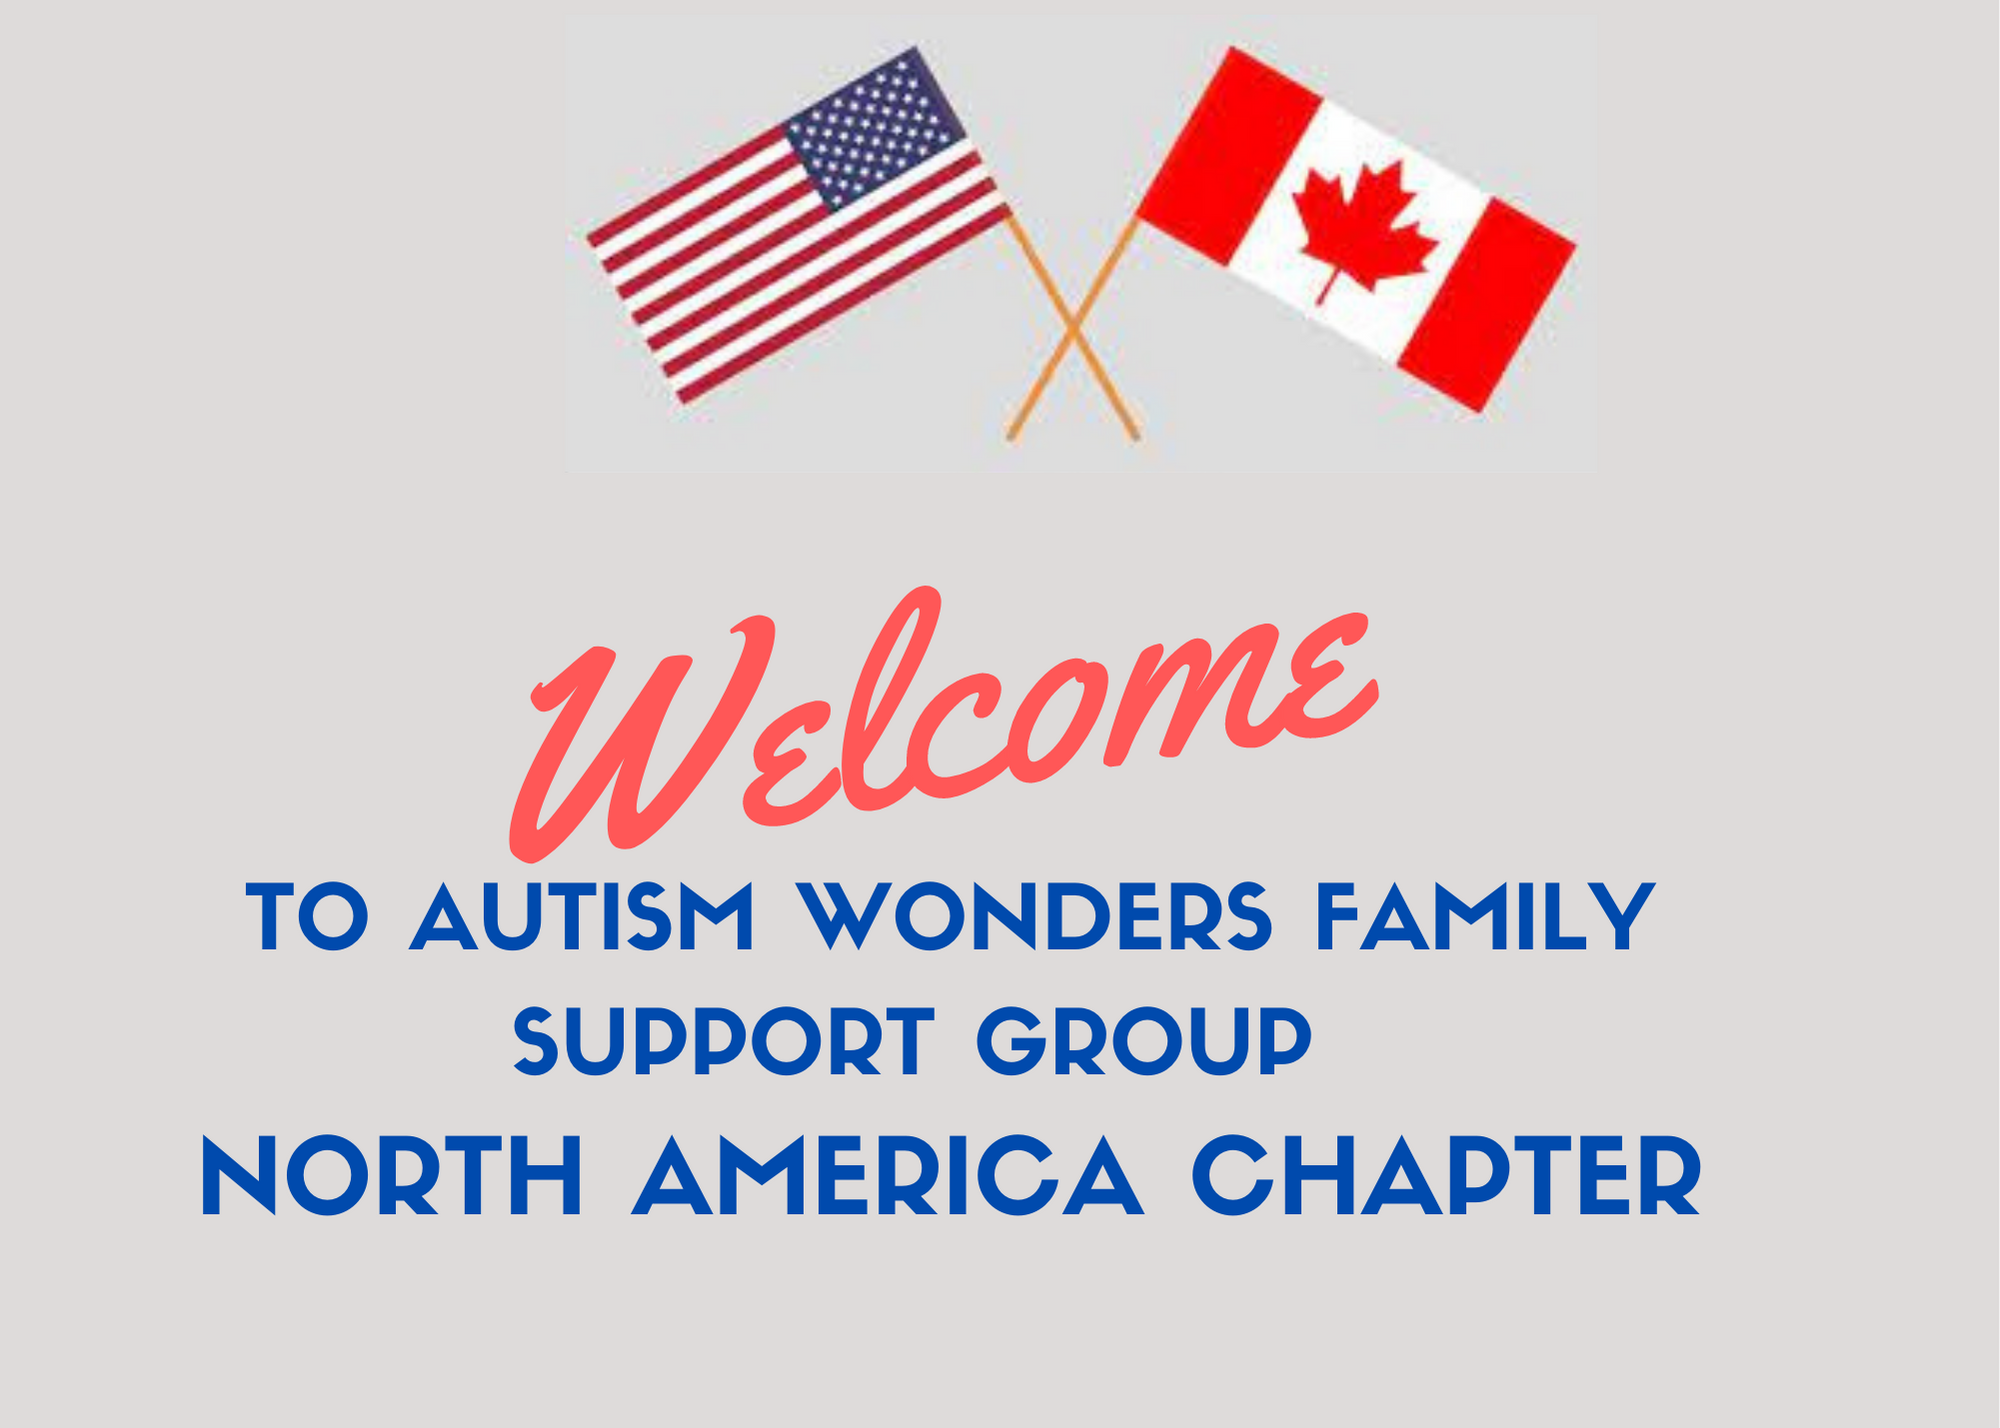 welcome to the autism wonder family support group (North America chapter)